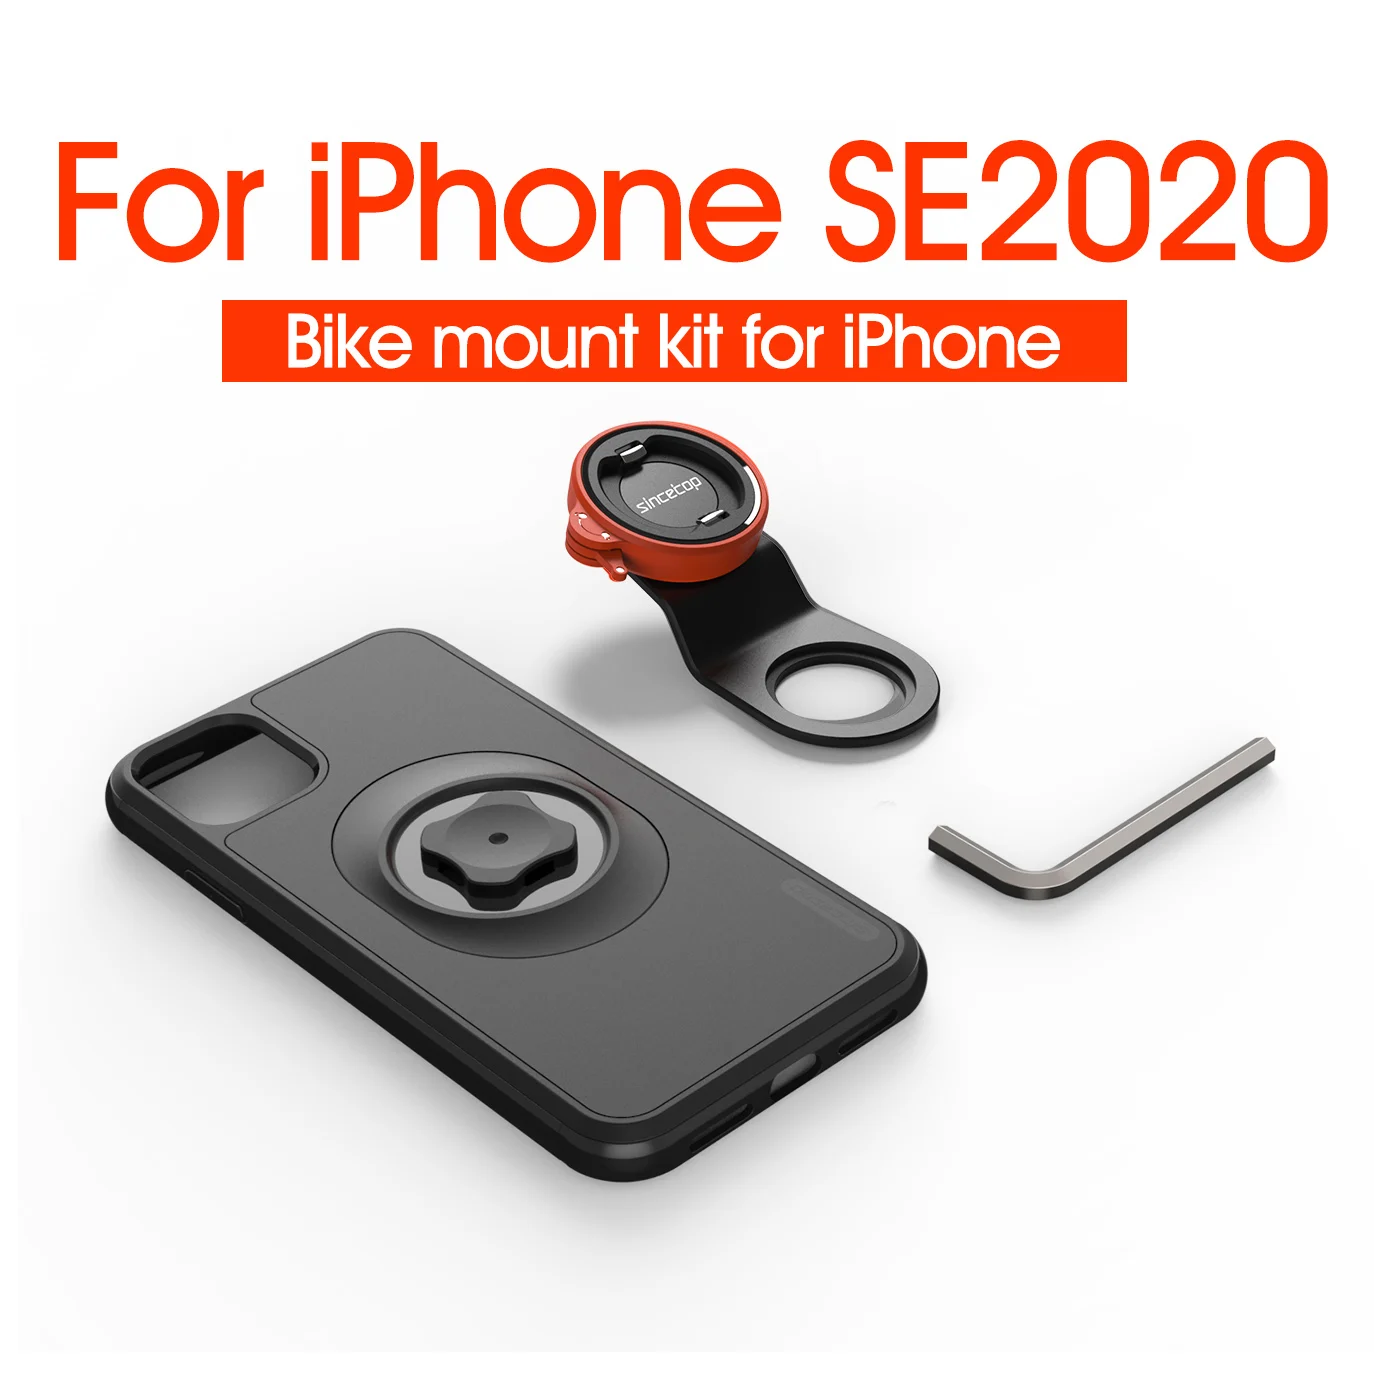 mobile phone stand Mountain Bike Phone holder for iPhone 11Pro X MAX Xr 8plus 7 SE bicycle Mount Bracket Clip rotate Stand Kit With shockproof case flexible phone holder Holders & Stands